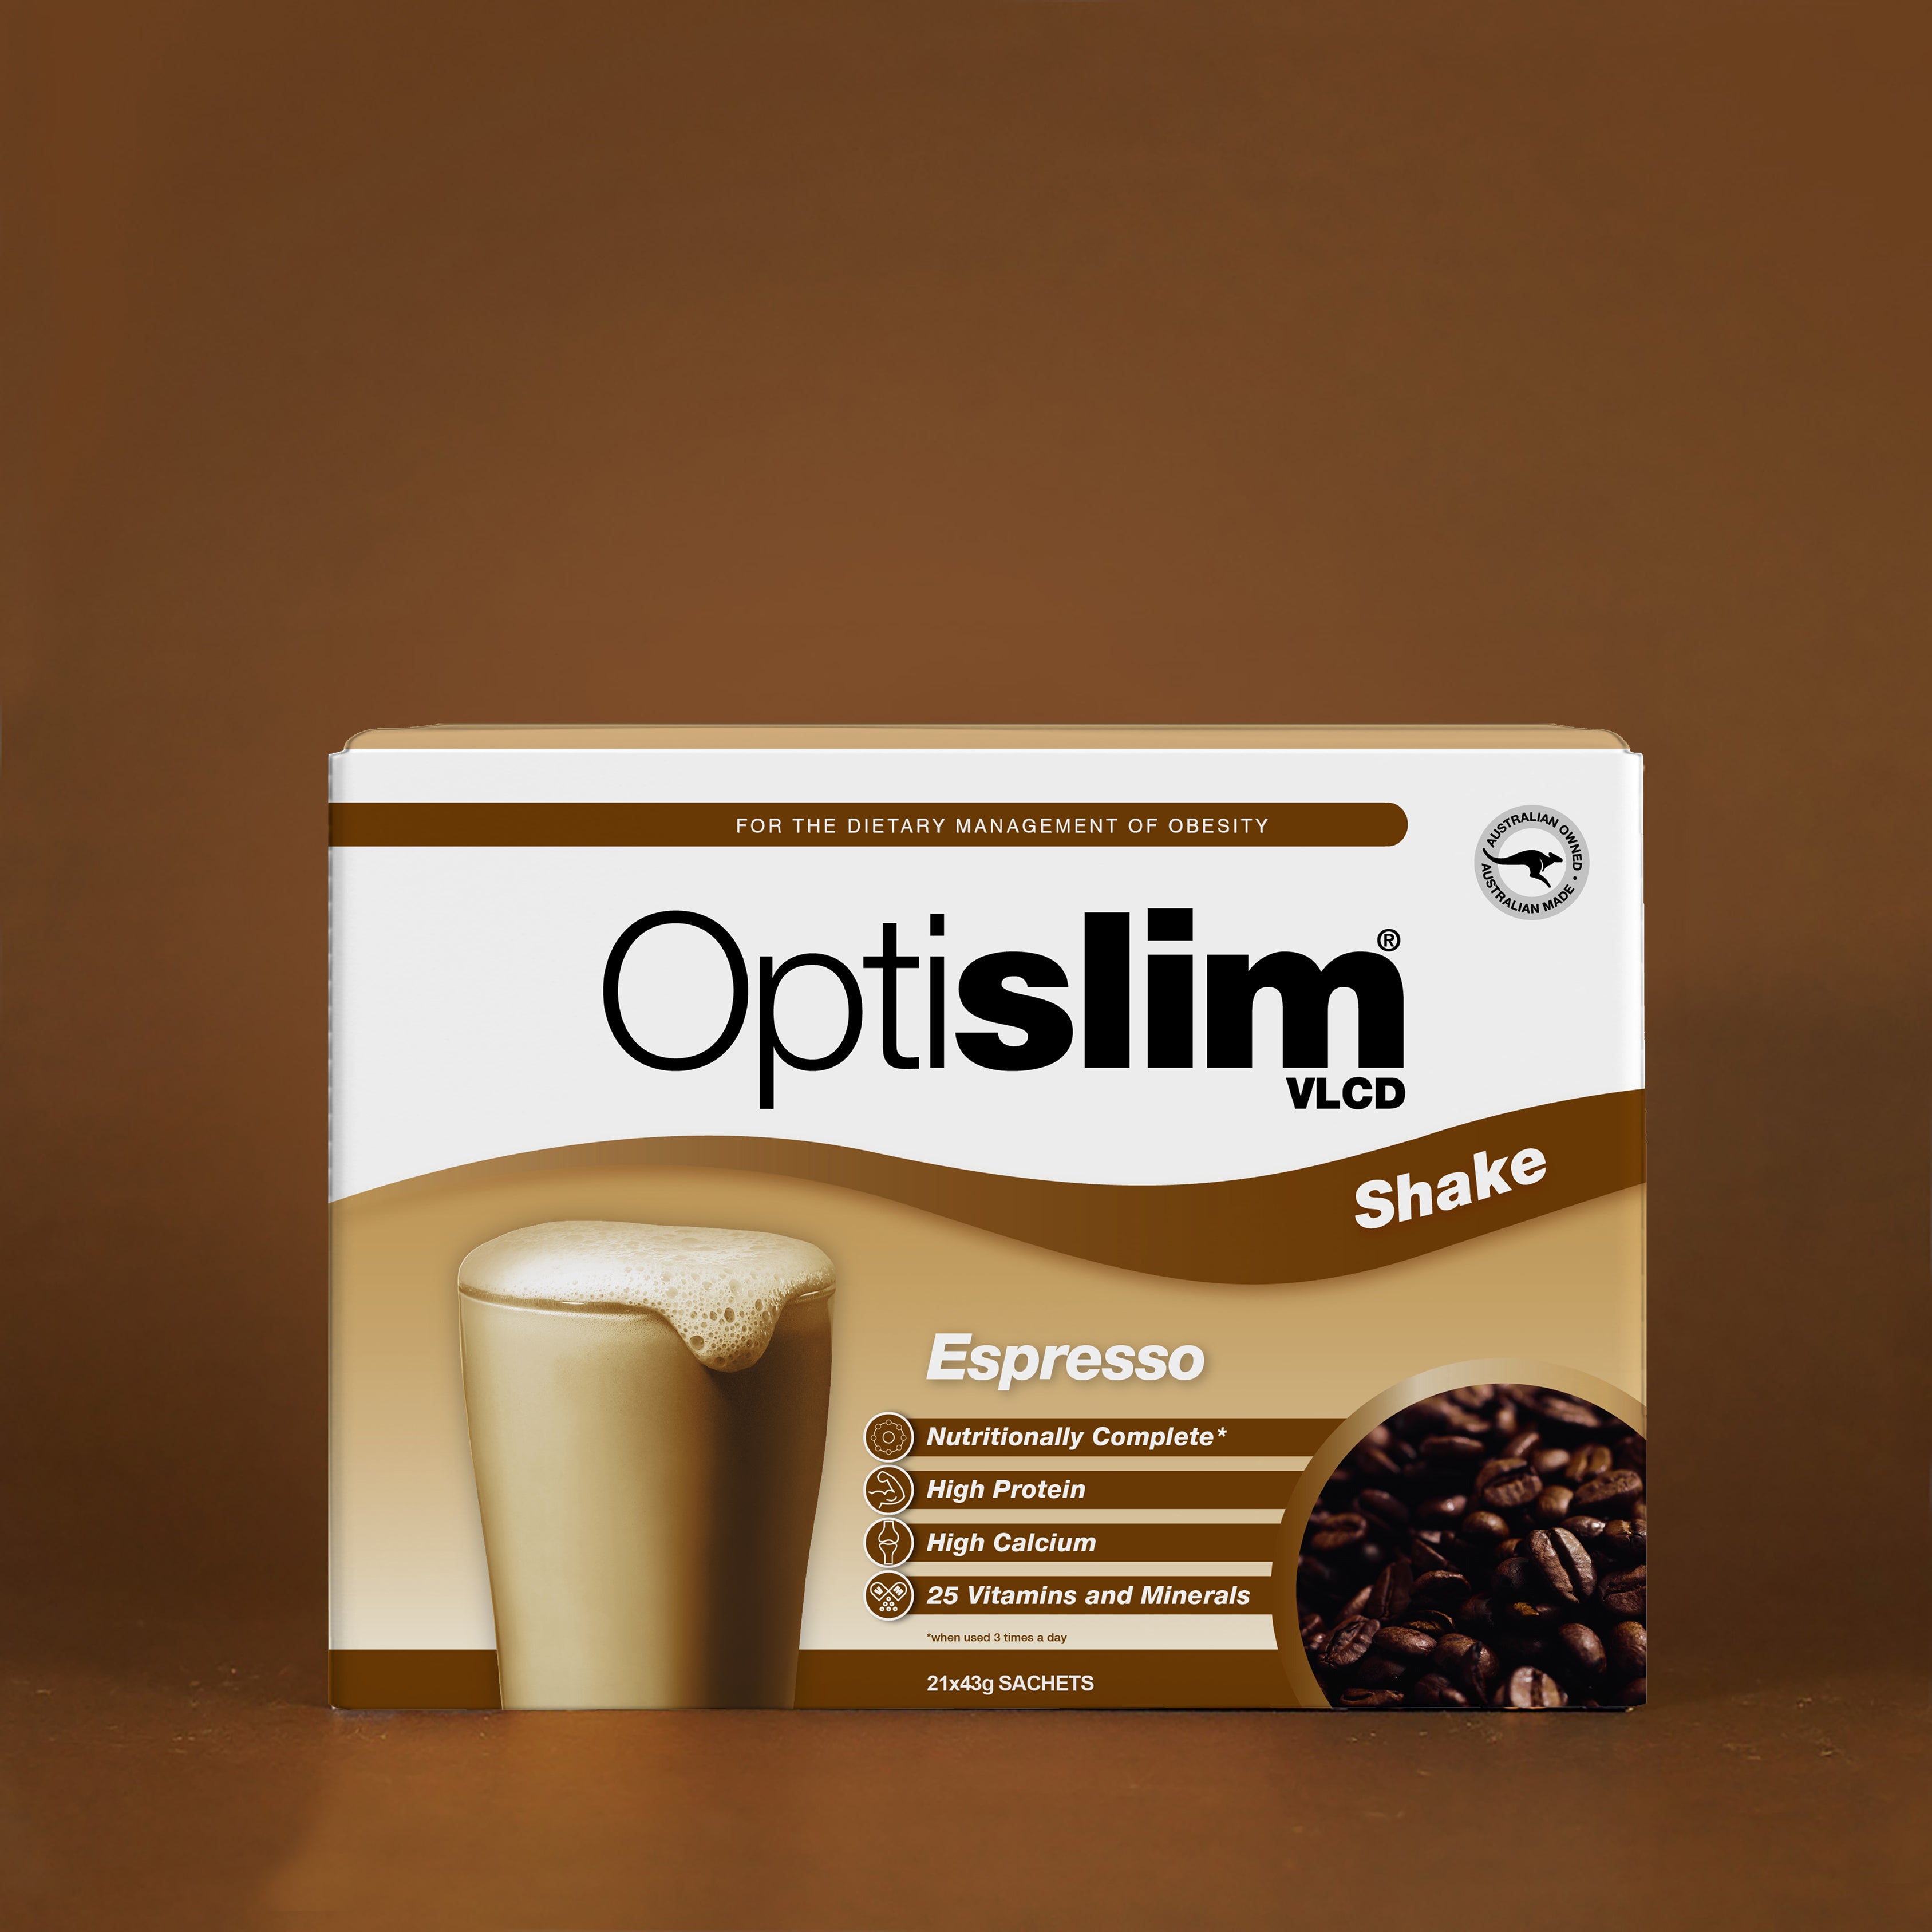 VLCD Meal Replacement Shake Espresso - Optislim